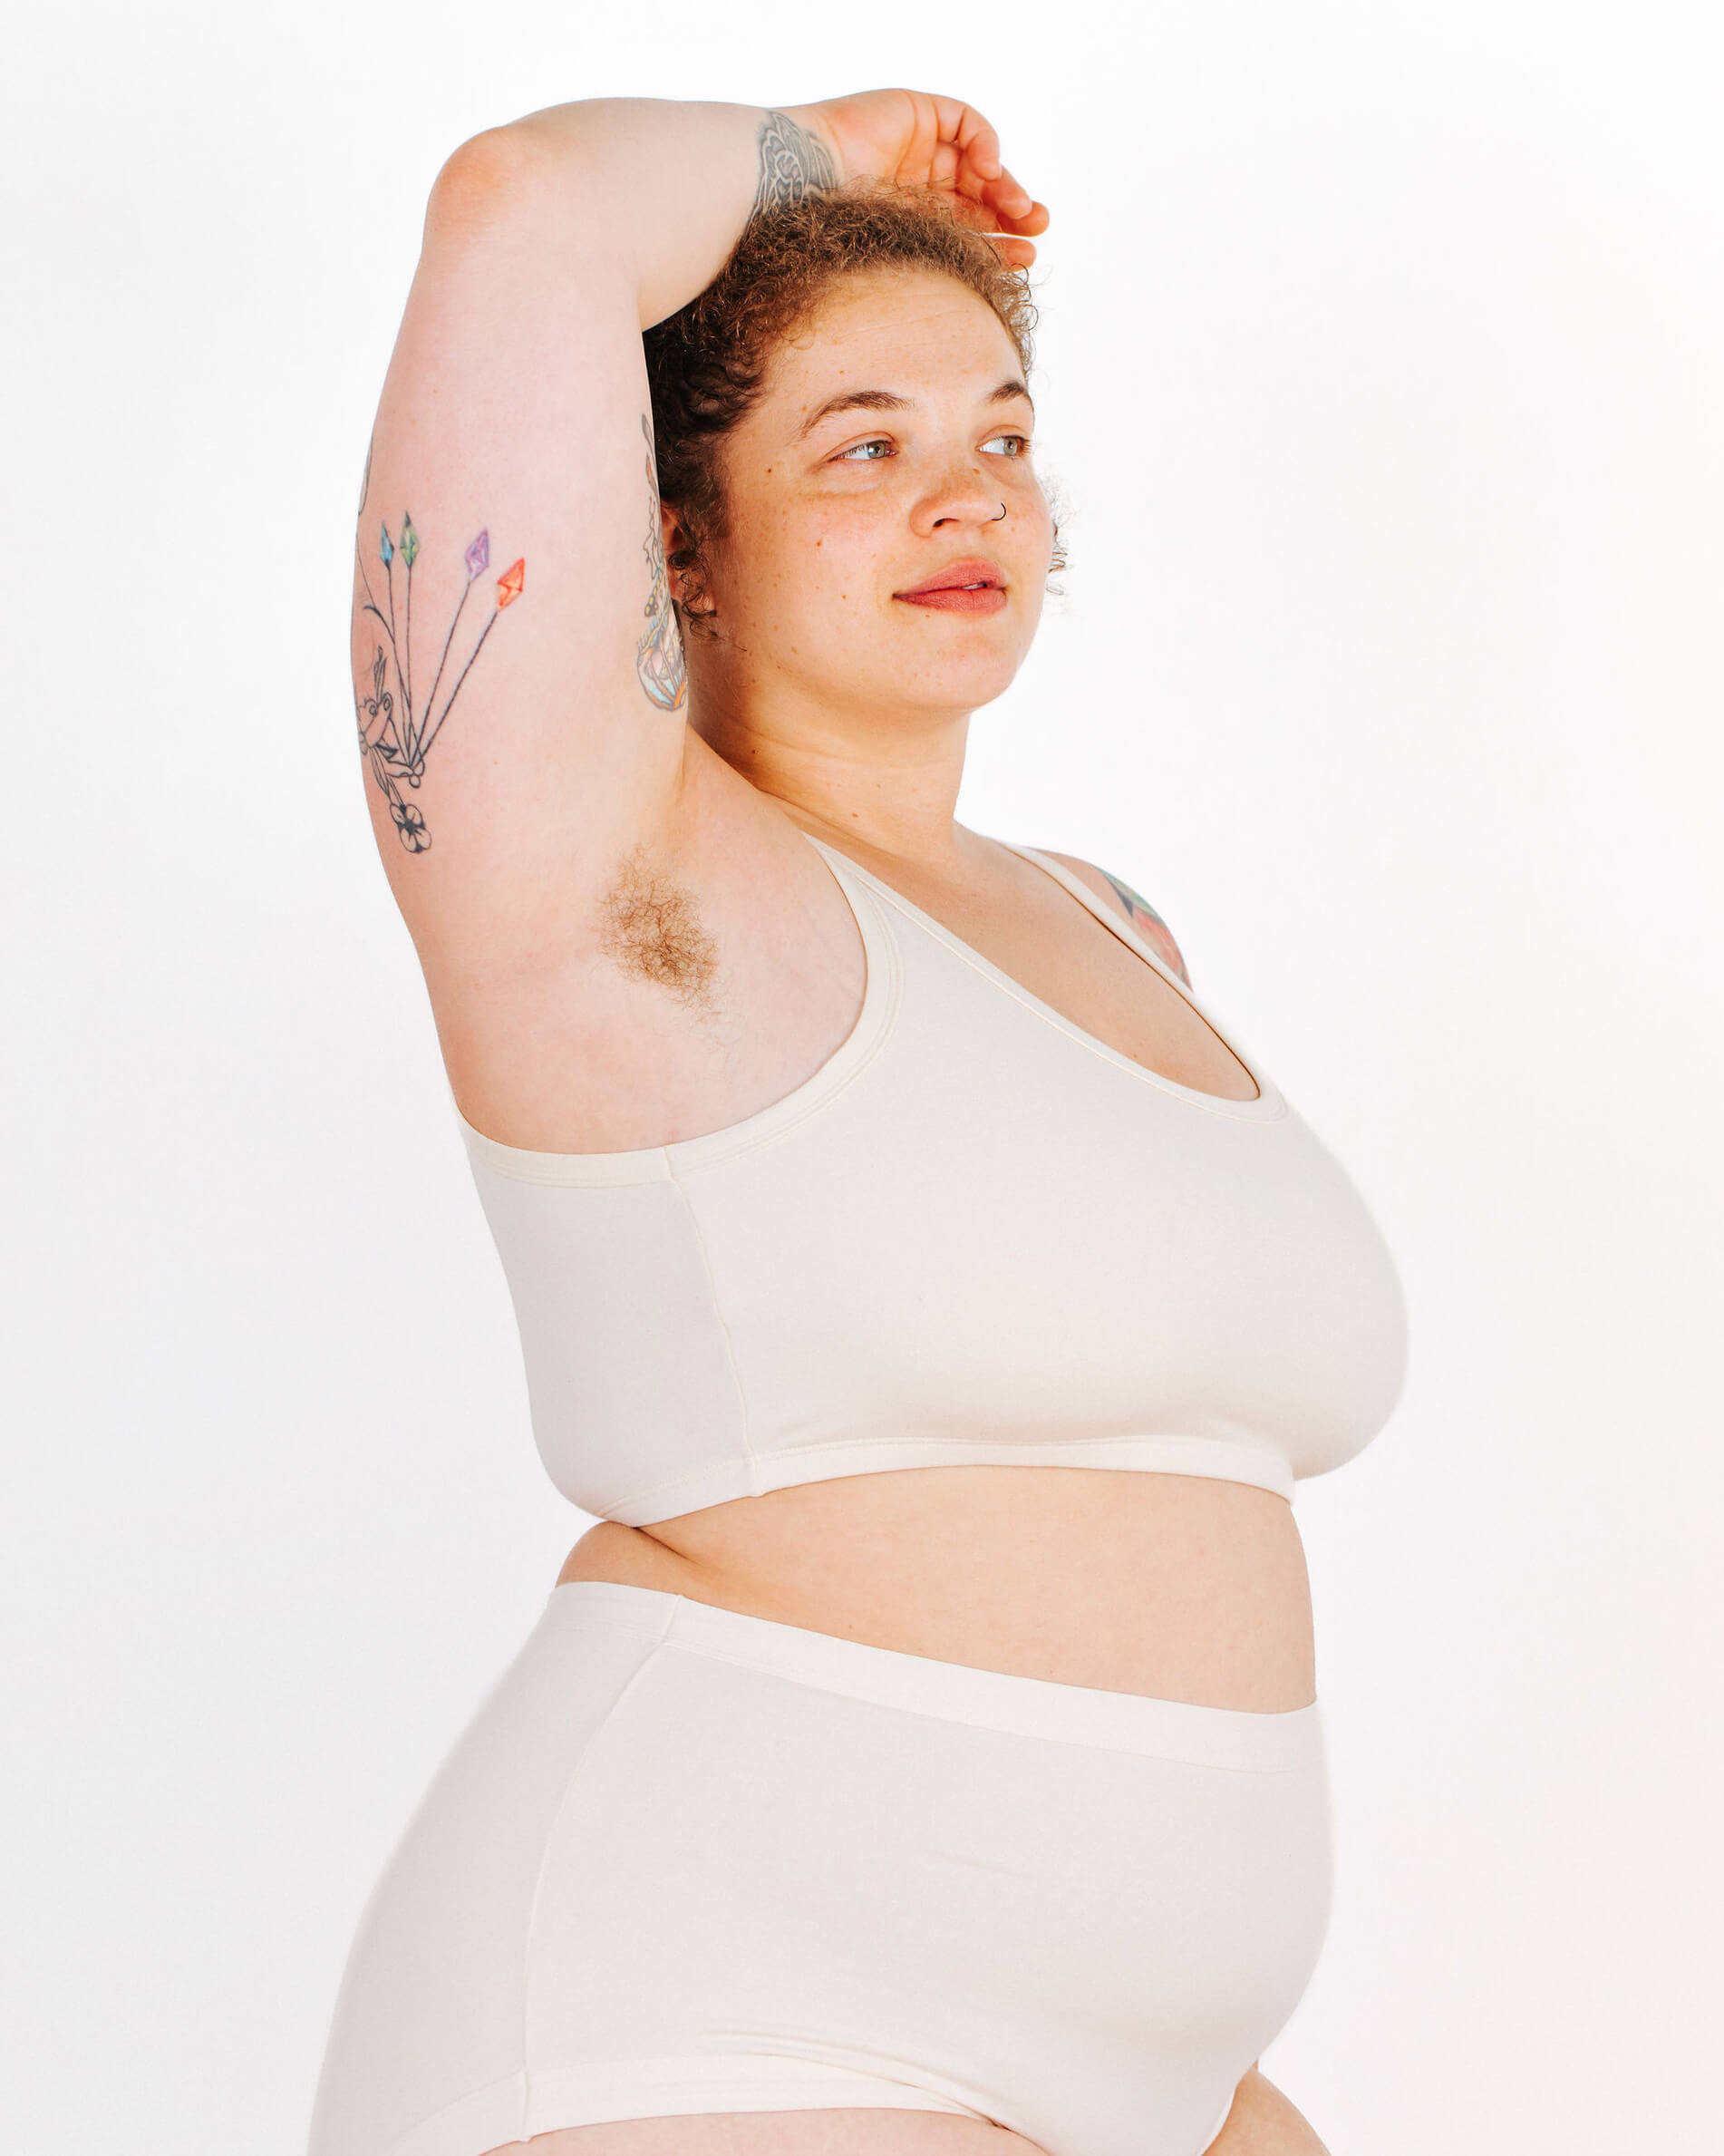 Fit photo from the side of Thunderpants organic cotton Longline Bra in off-white on a model.